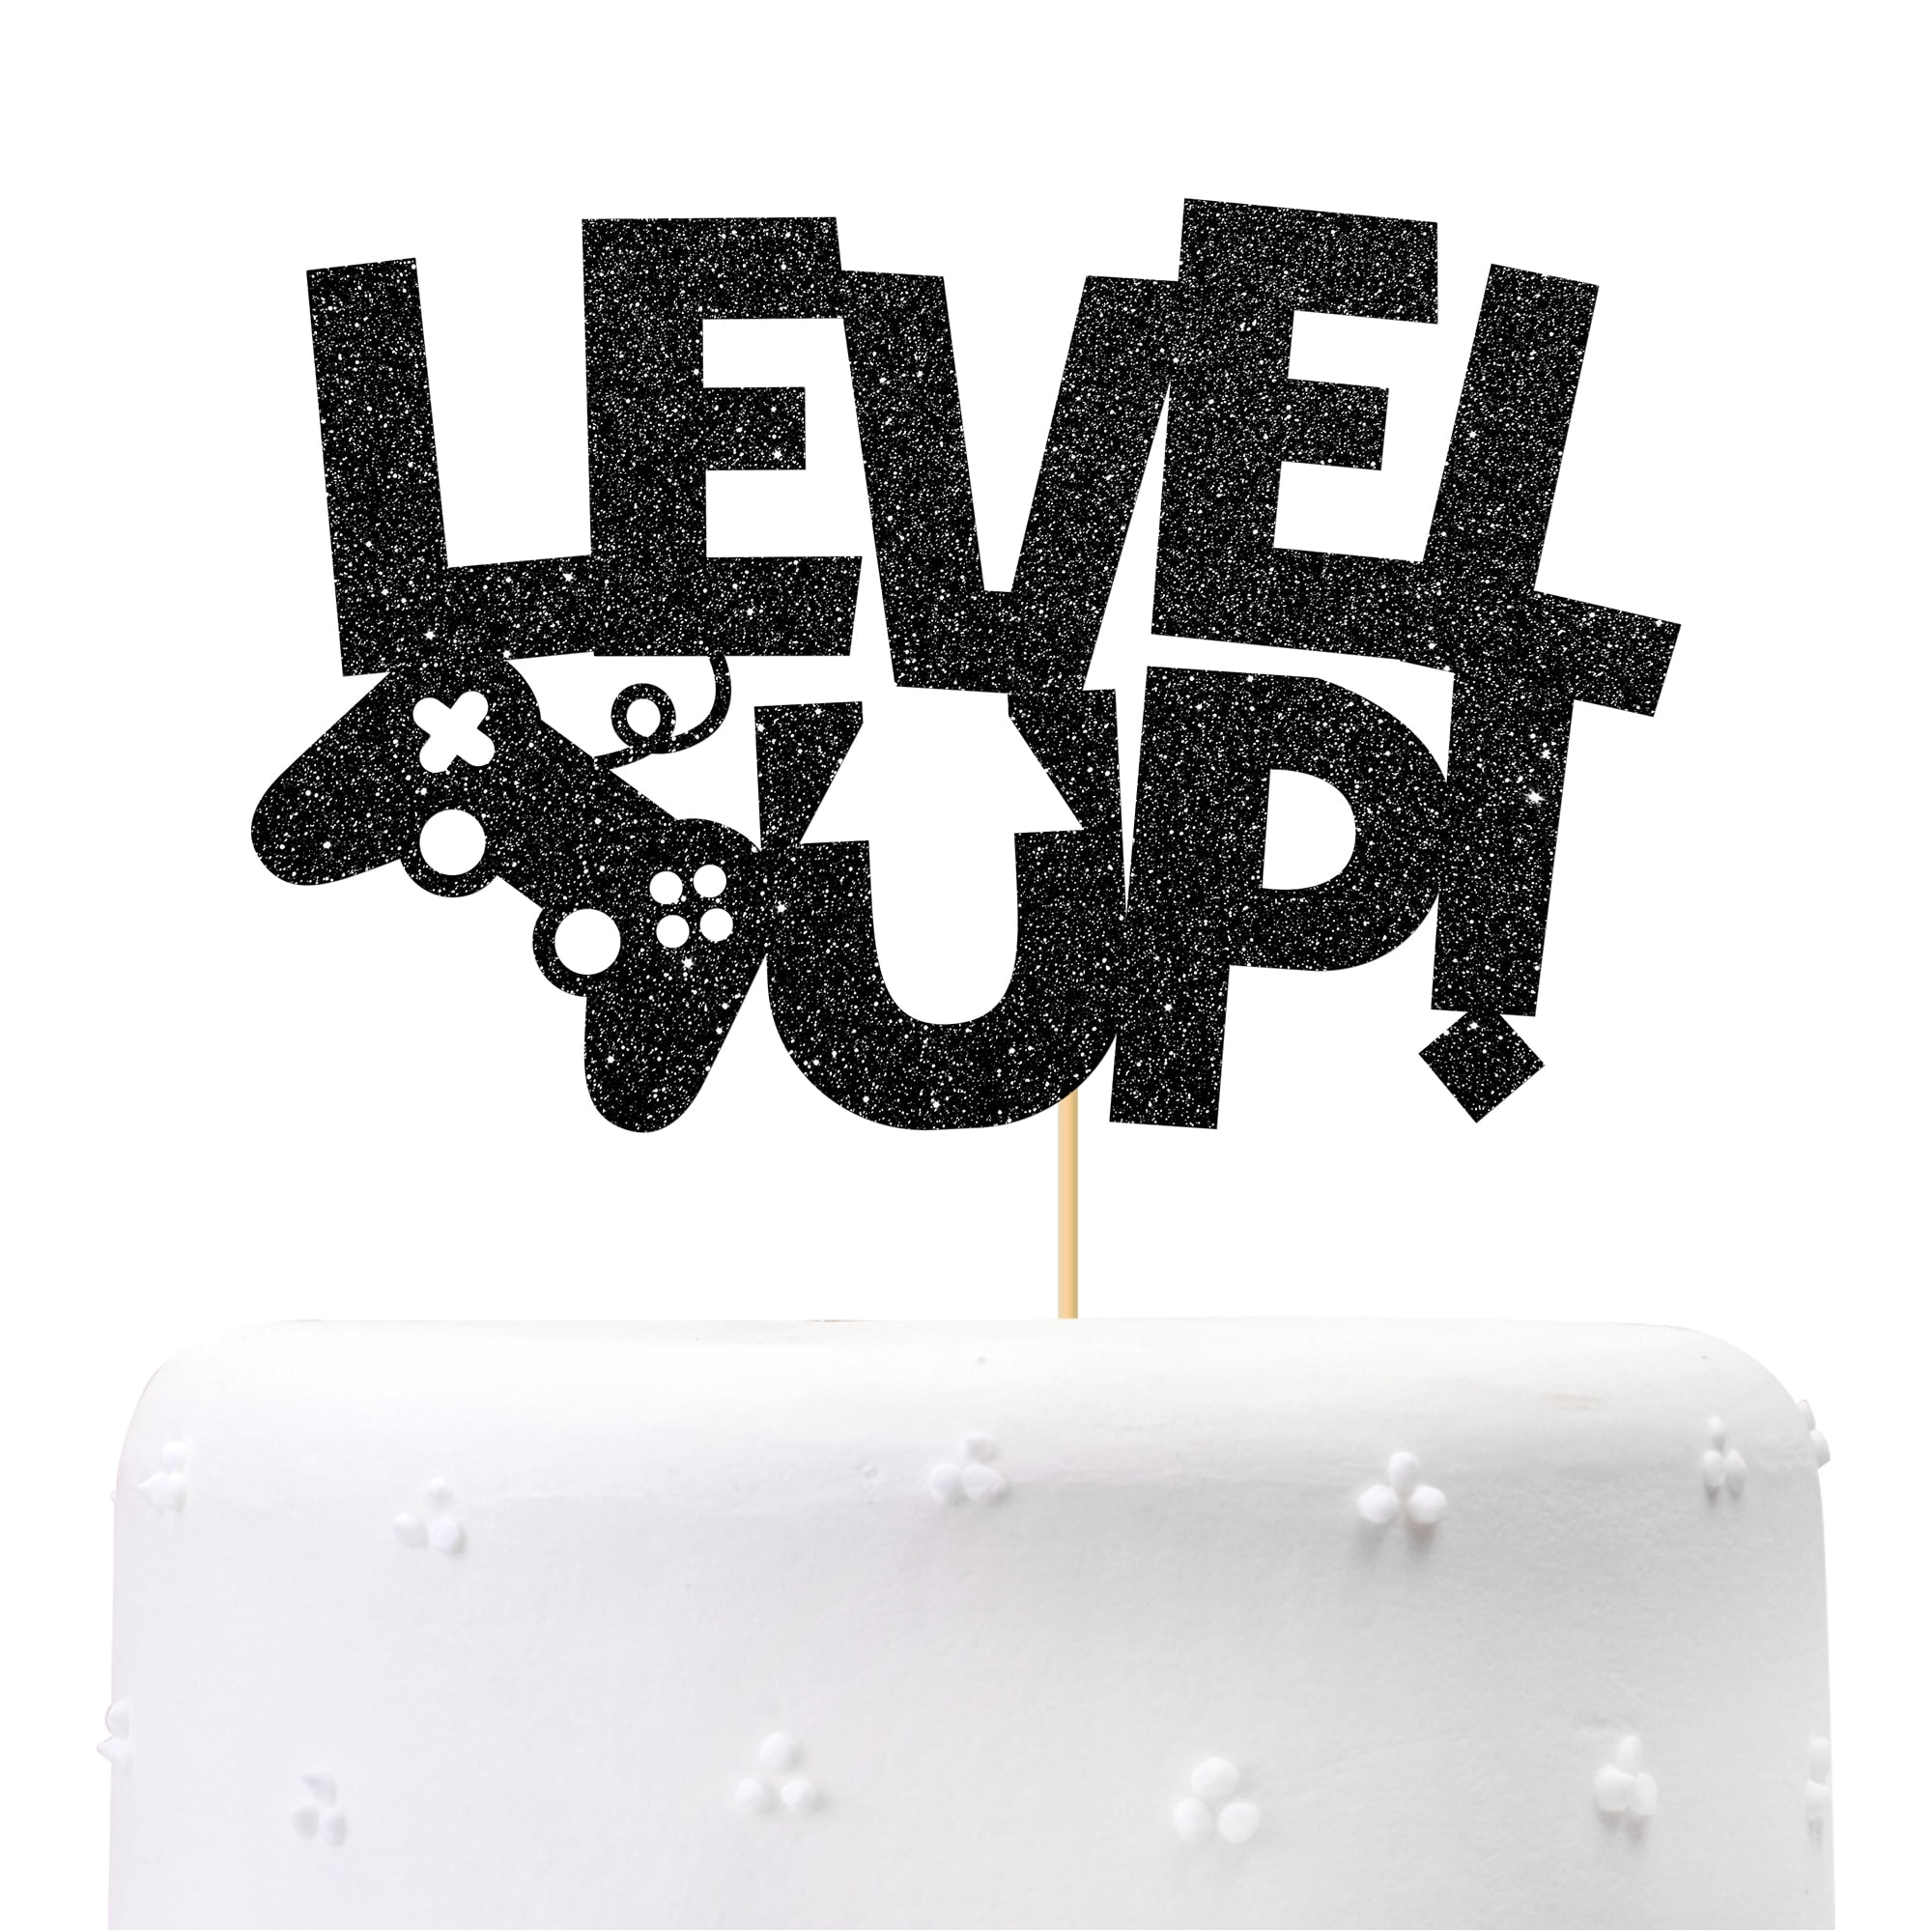  HAKPUOTR Video Game Cake Topper Set - 1 Large Video Game Cake  Topper and 12 Video Game Controllers Cupcake Toppers - PS5 Gamepad Cake  Toppers for Boy's Men's Birthday Party Decoration